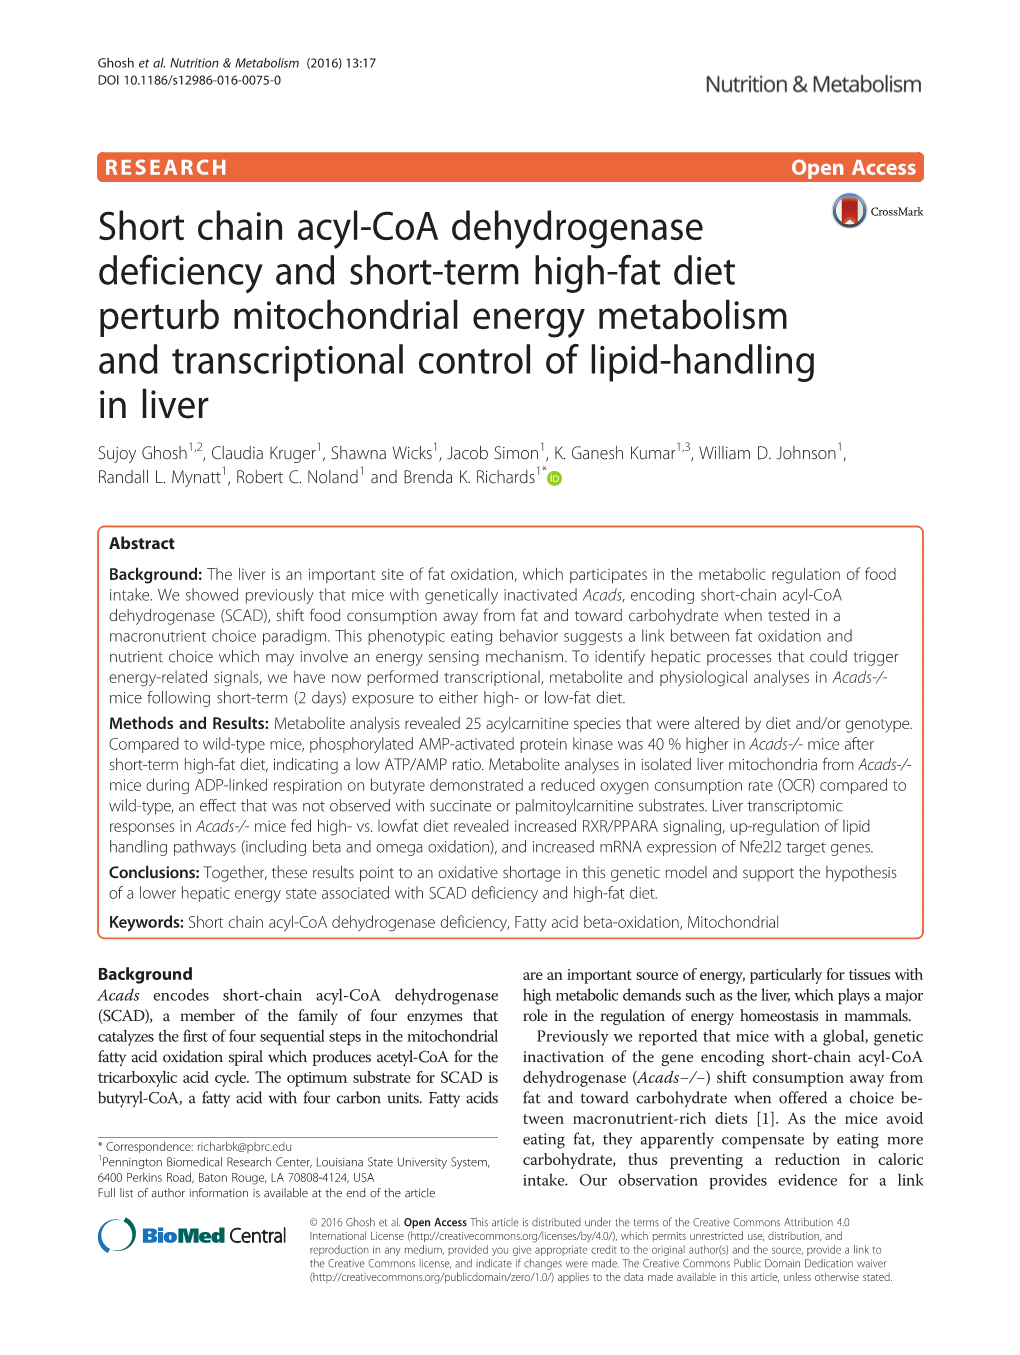 Short Chain Acyl-Coa Dehydrogenase Deficiency and Short-Term High-Fat Diet Perturb Mitochondrial Energy Metabolism and Transcrip